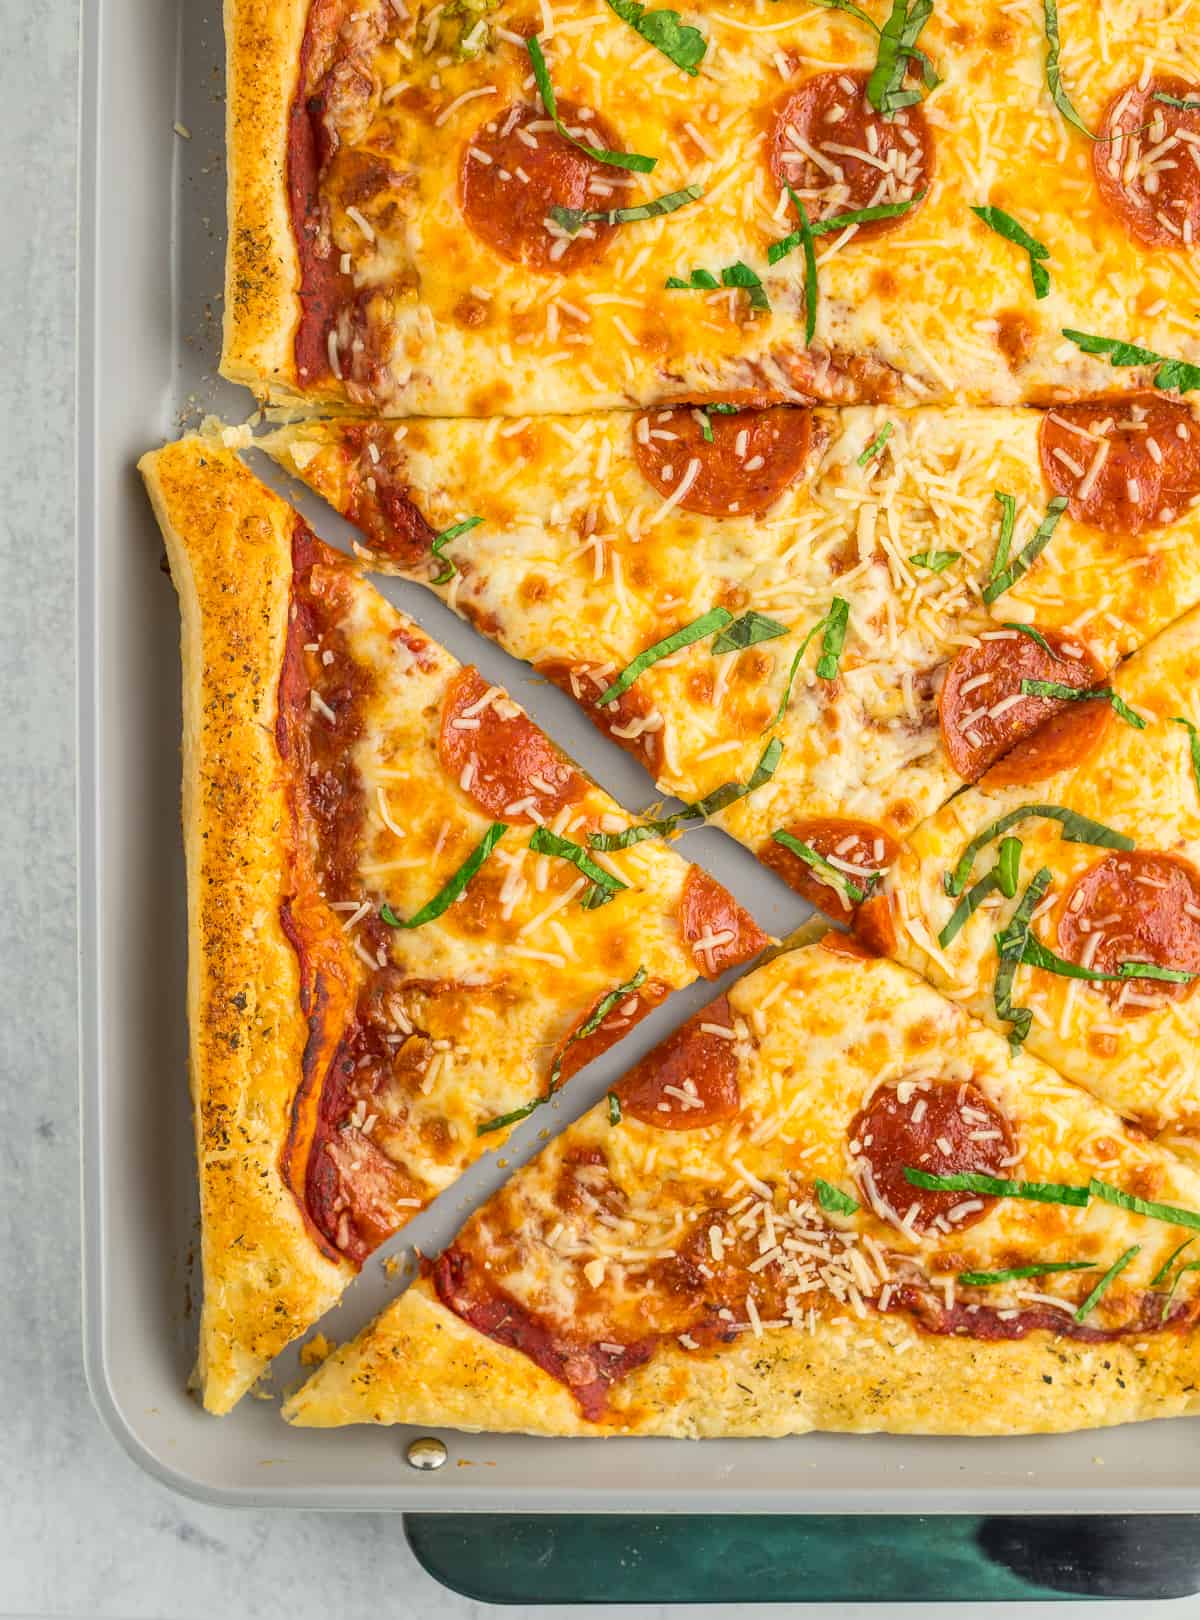 a puff pastry pizza with slices removed. The pizza is topped with pepperoni and shredded basil.